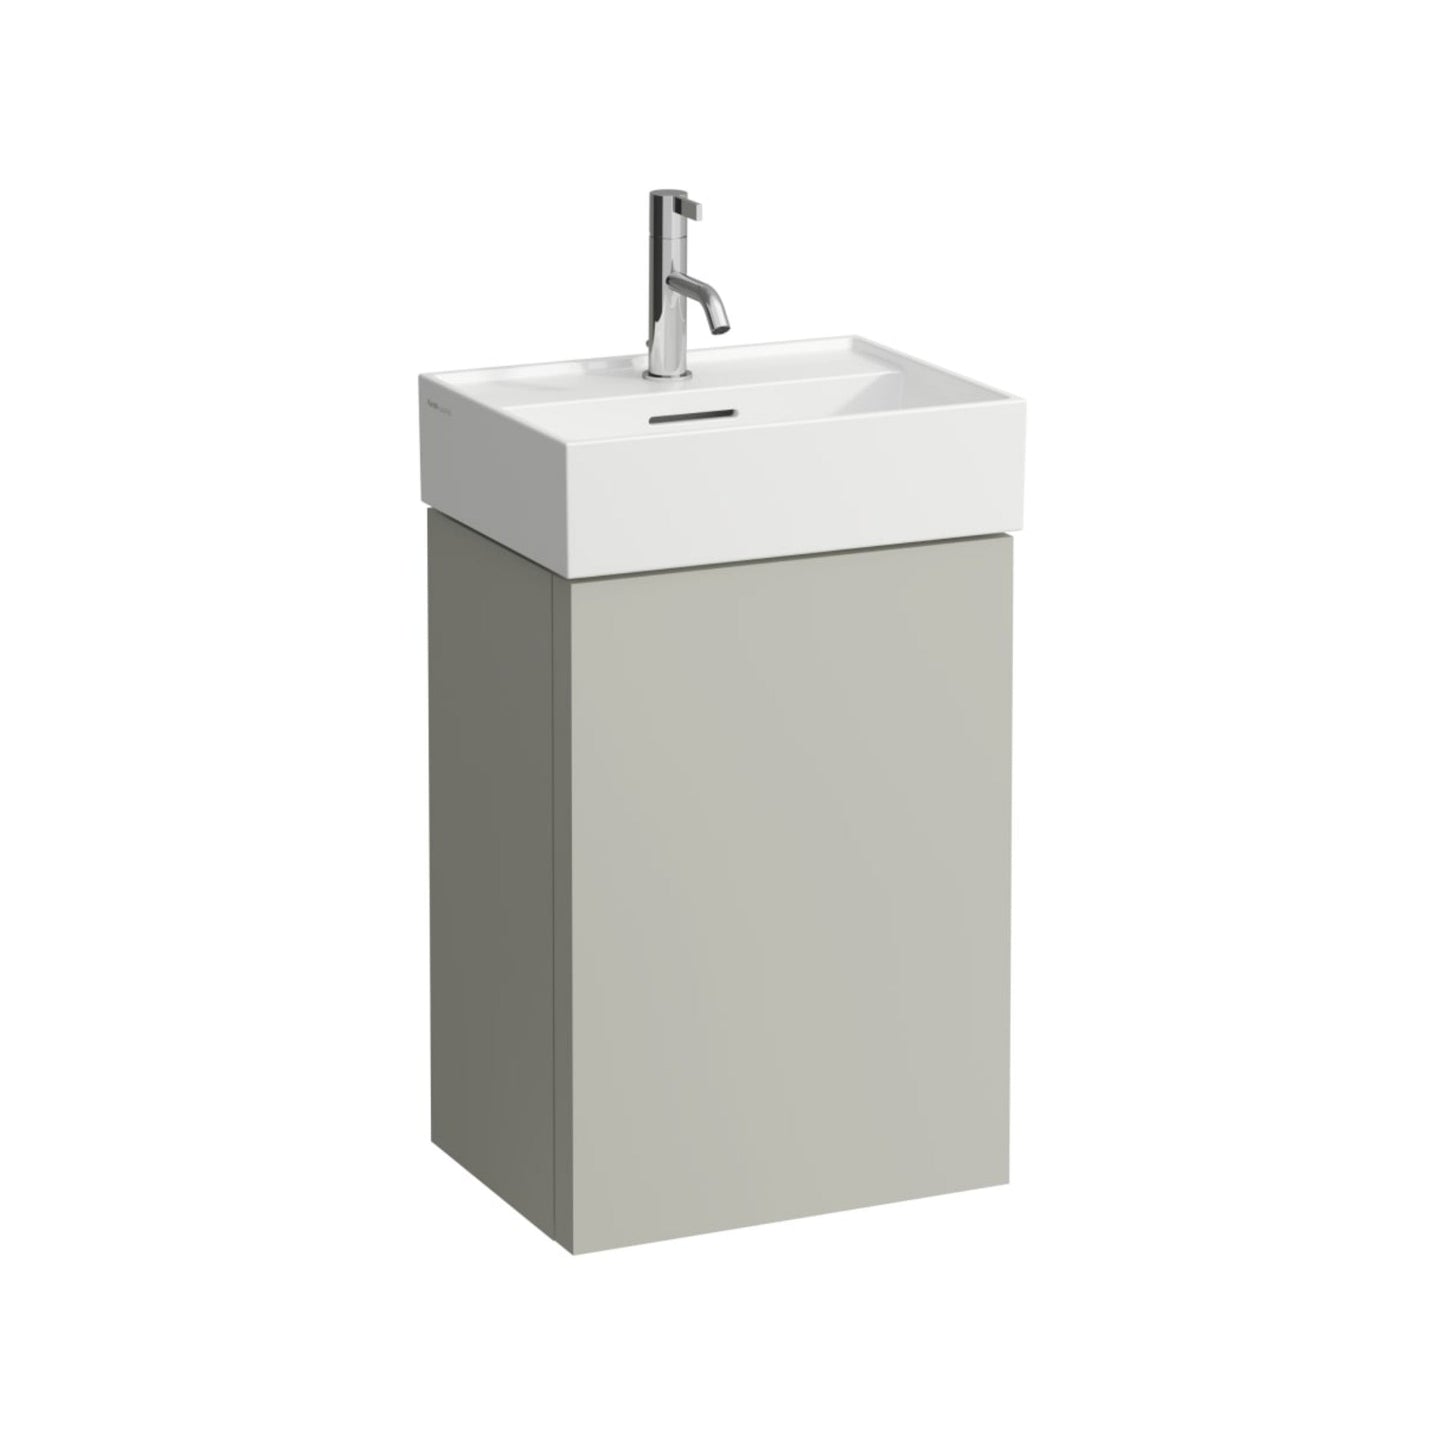 Laufen Kartell 18" x 13" White Wall-Mounted Bathroom Sink With Faucet Hole